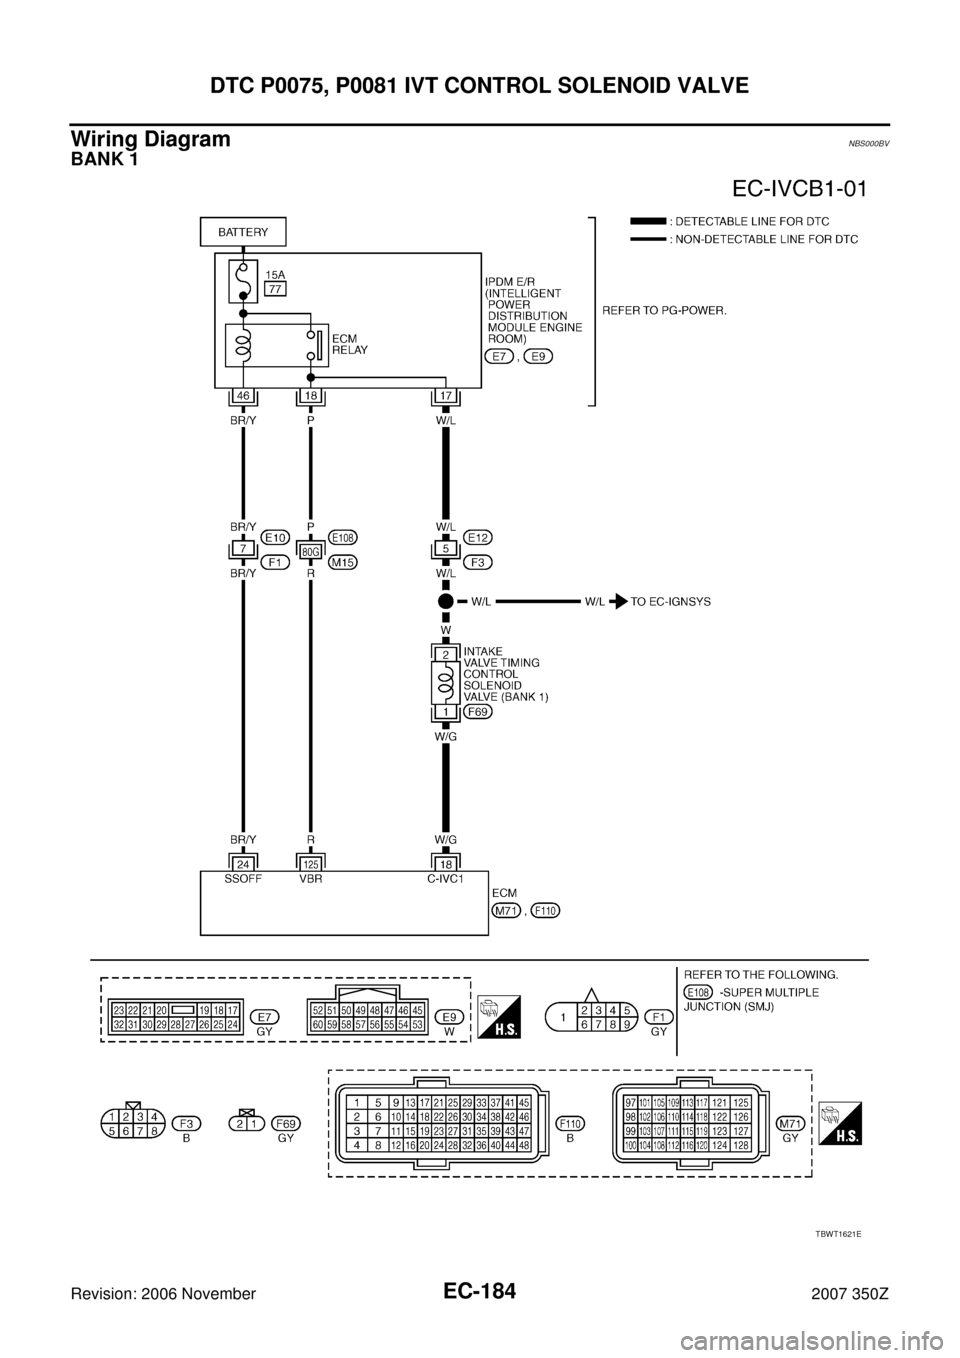 NISSAN 350Z 2007 Z33 Engine Control User Guide EC-184
DTC P0075, P0081 IVT CONTROL SOLENOID VALVE
Revision: 2006 November2007 350Z
Wiring DiagramNBS000BV
BANK 1
TBWT1621E 